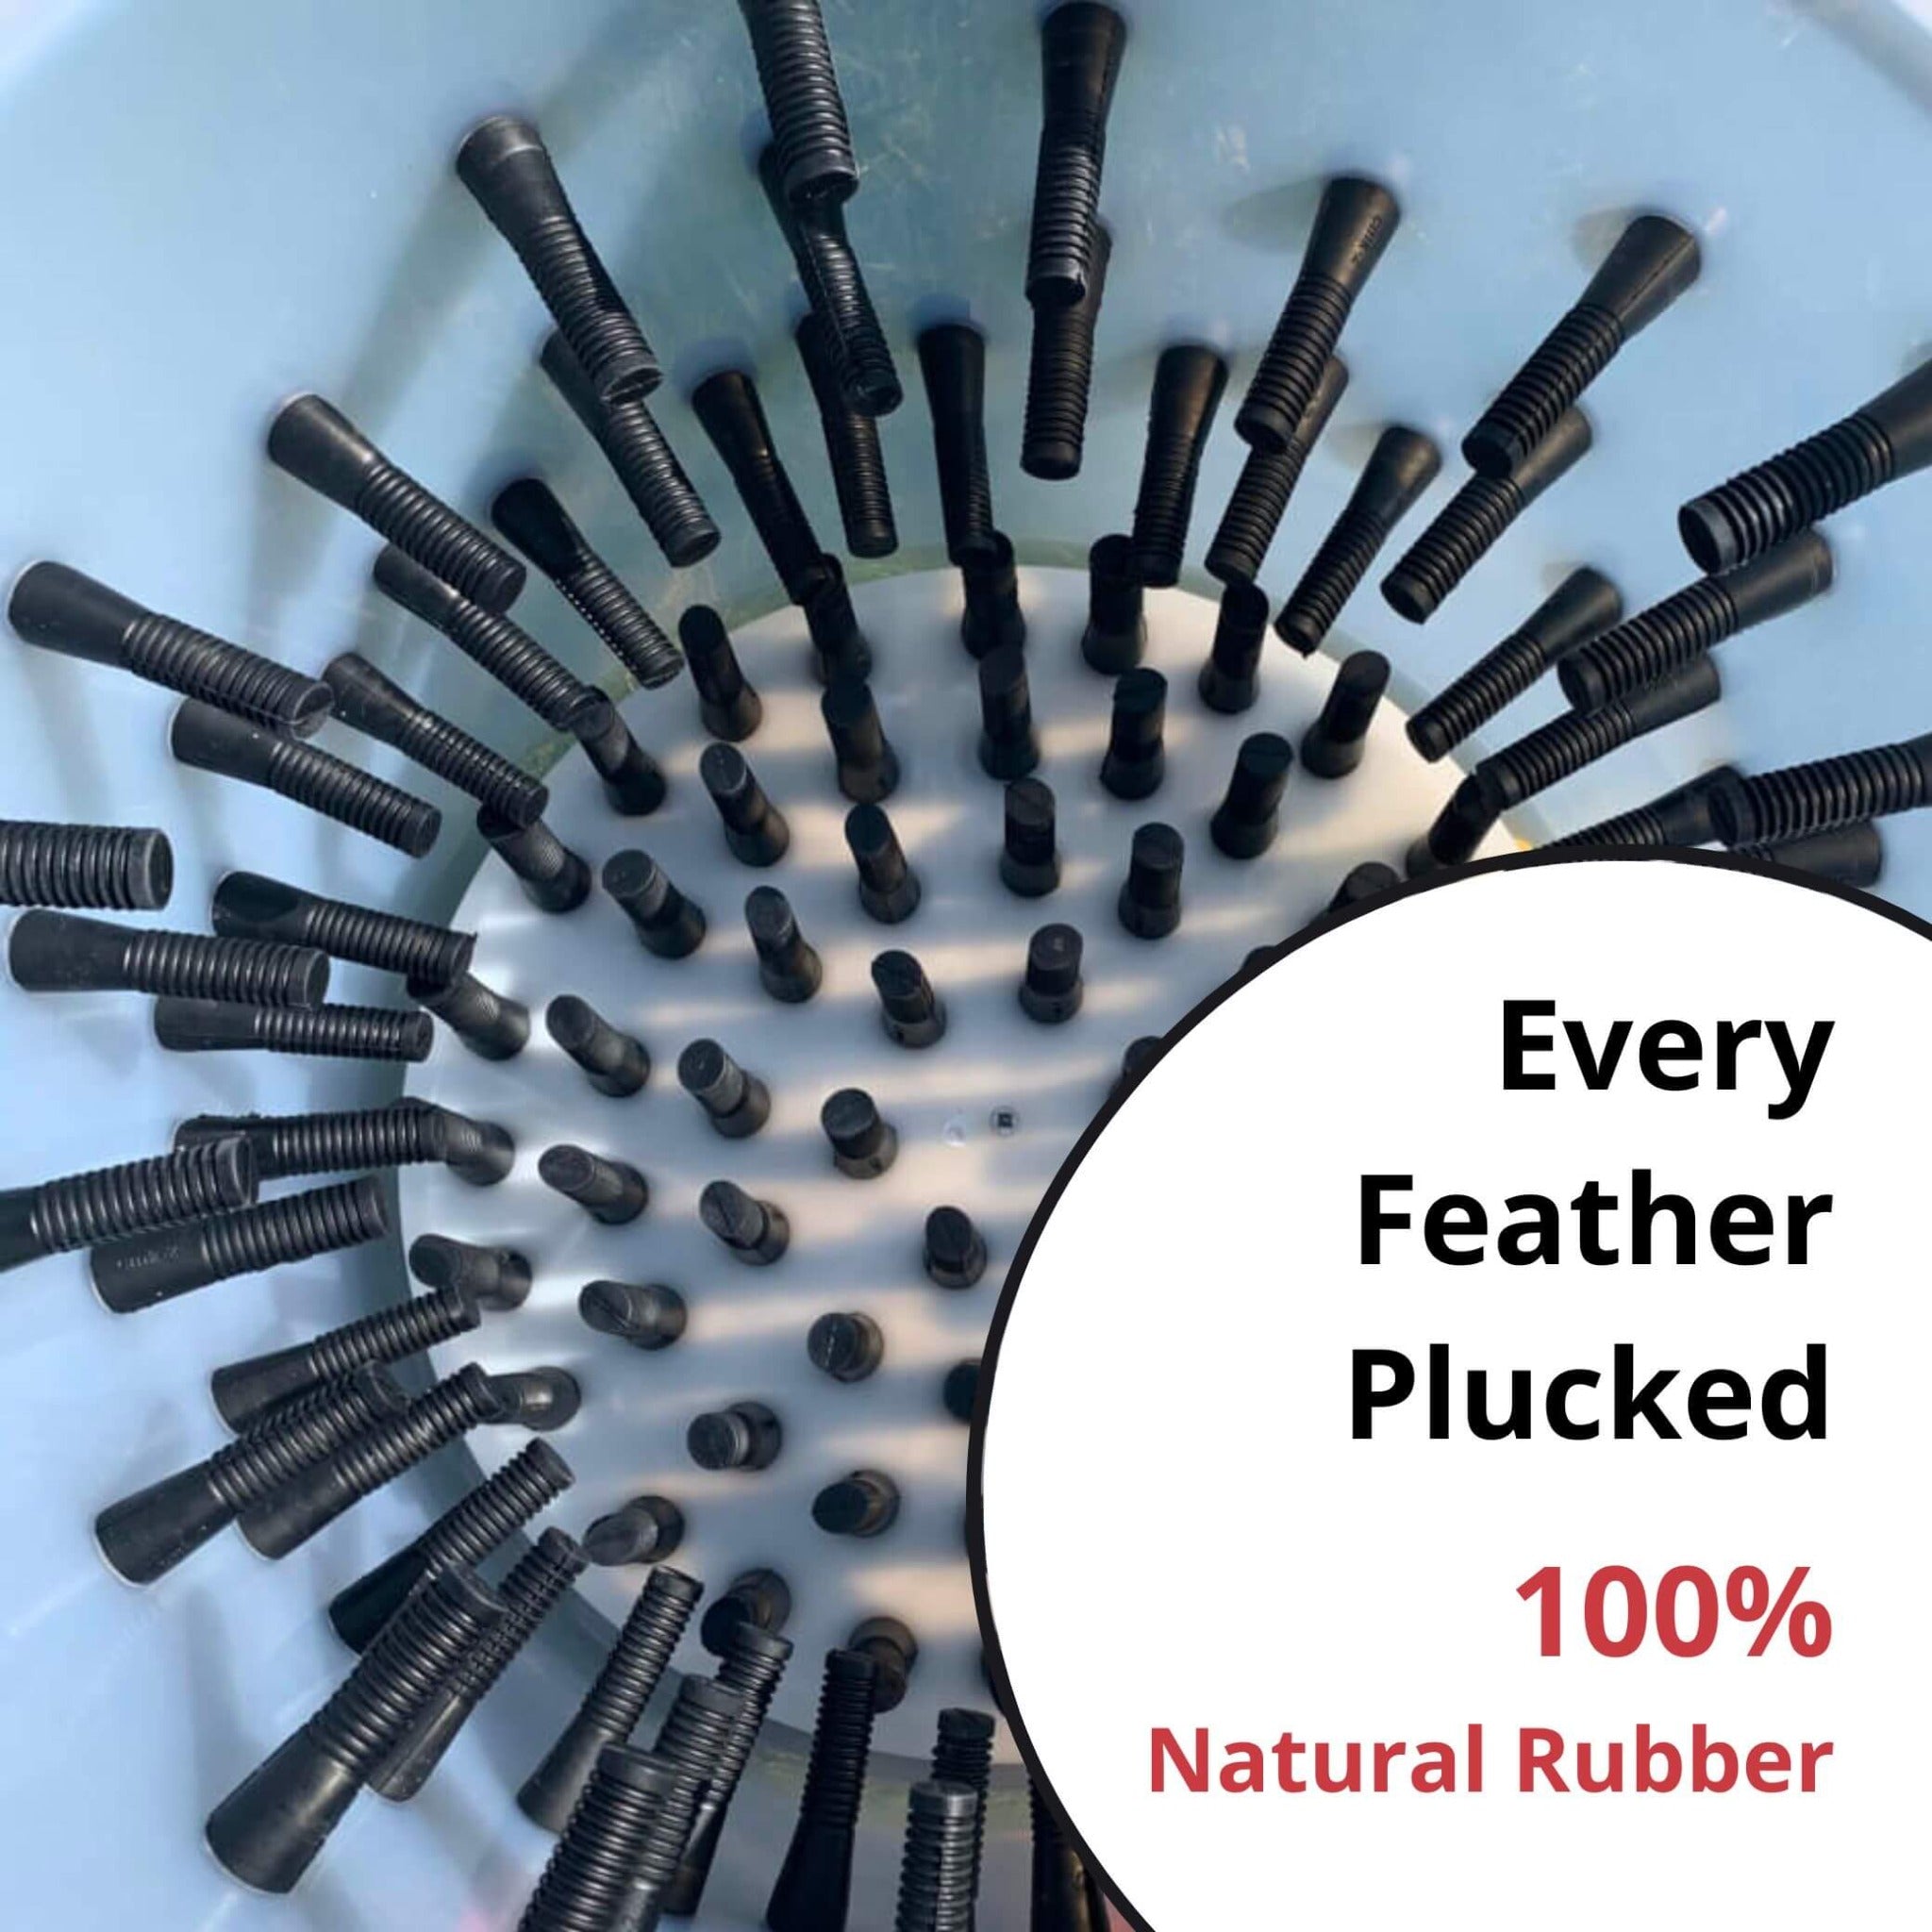 Hatching Time Cimuka. Above view of feather plucker. Text reads “every feather plucked. 100% Natural rubber.